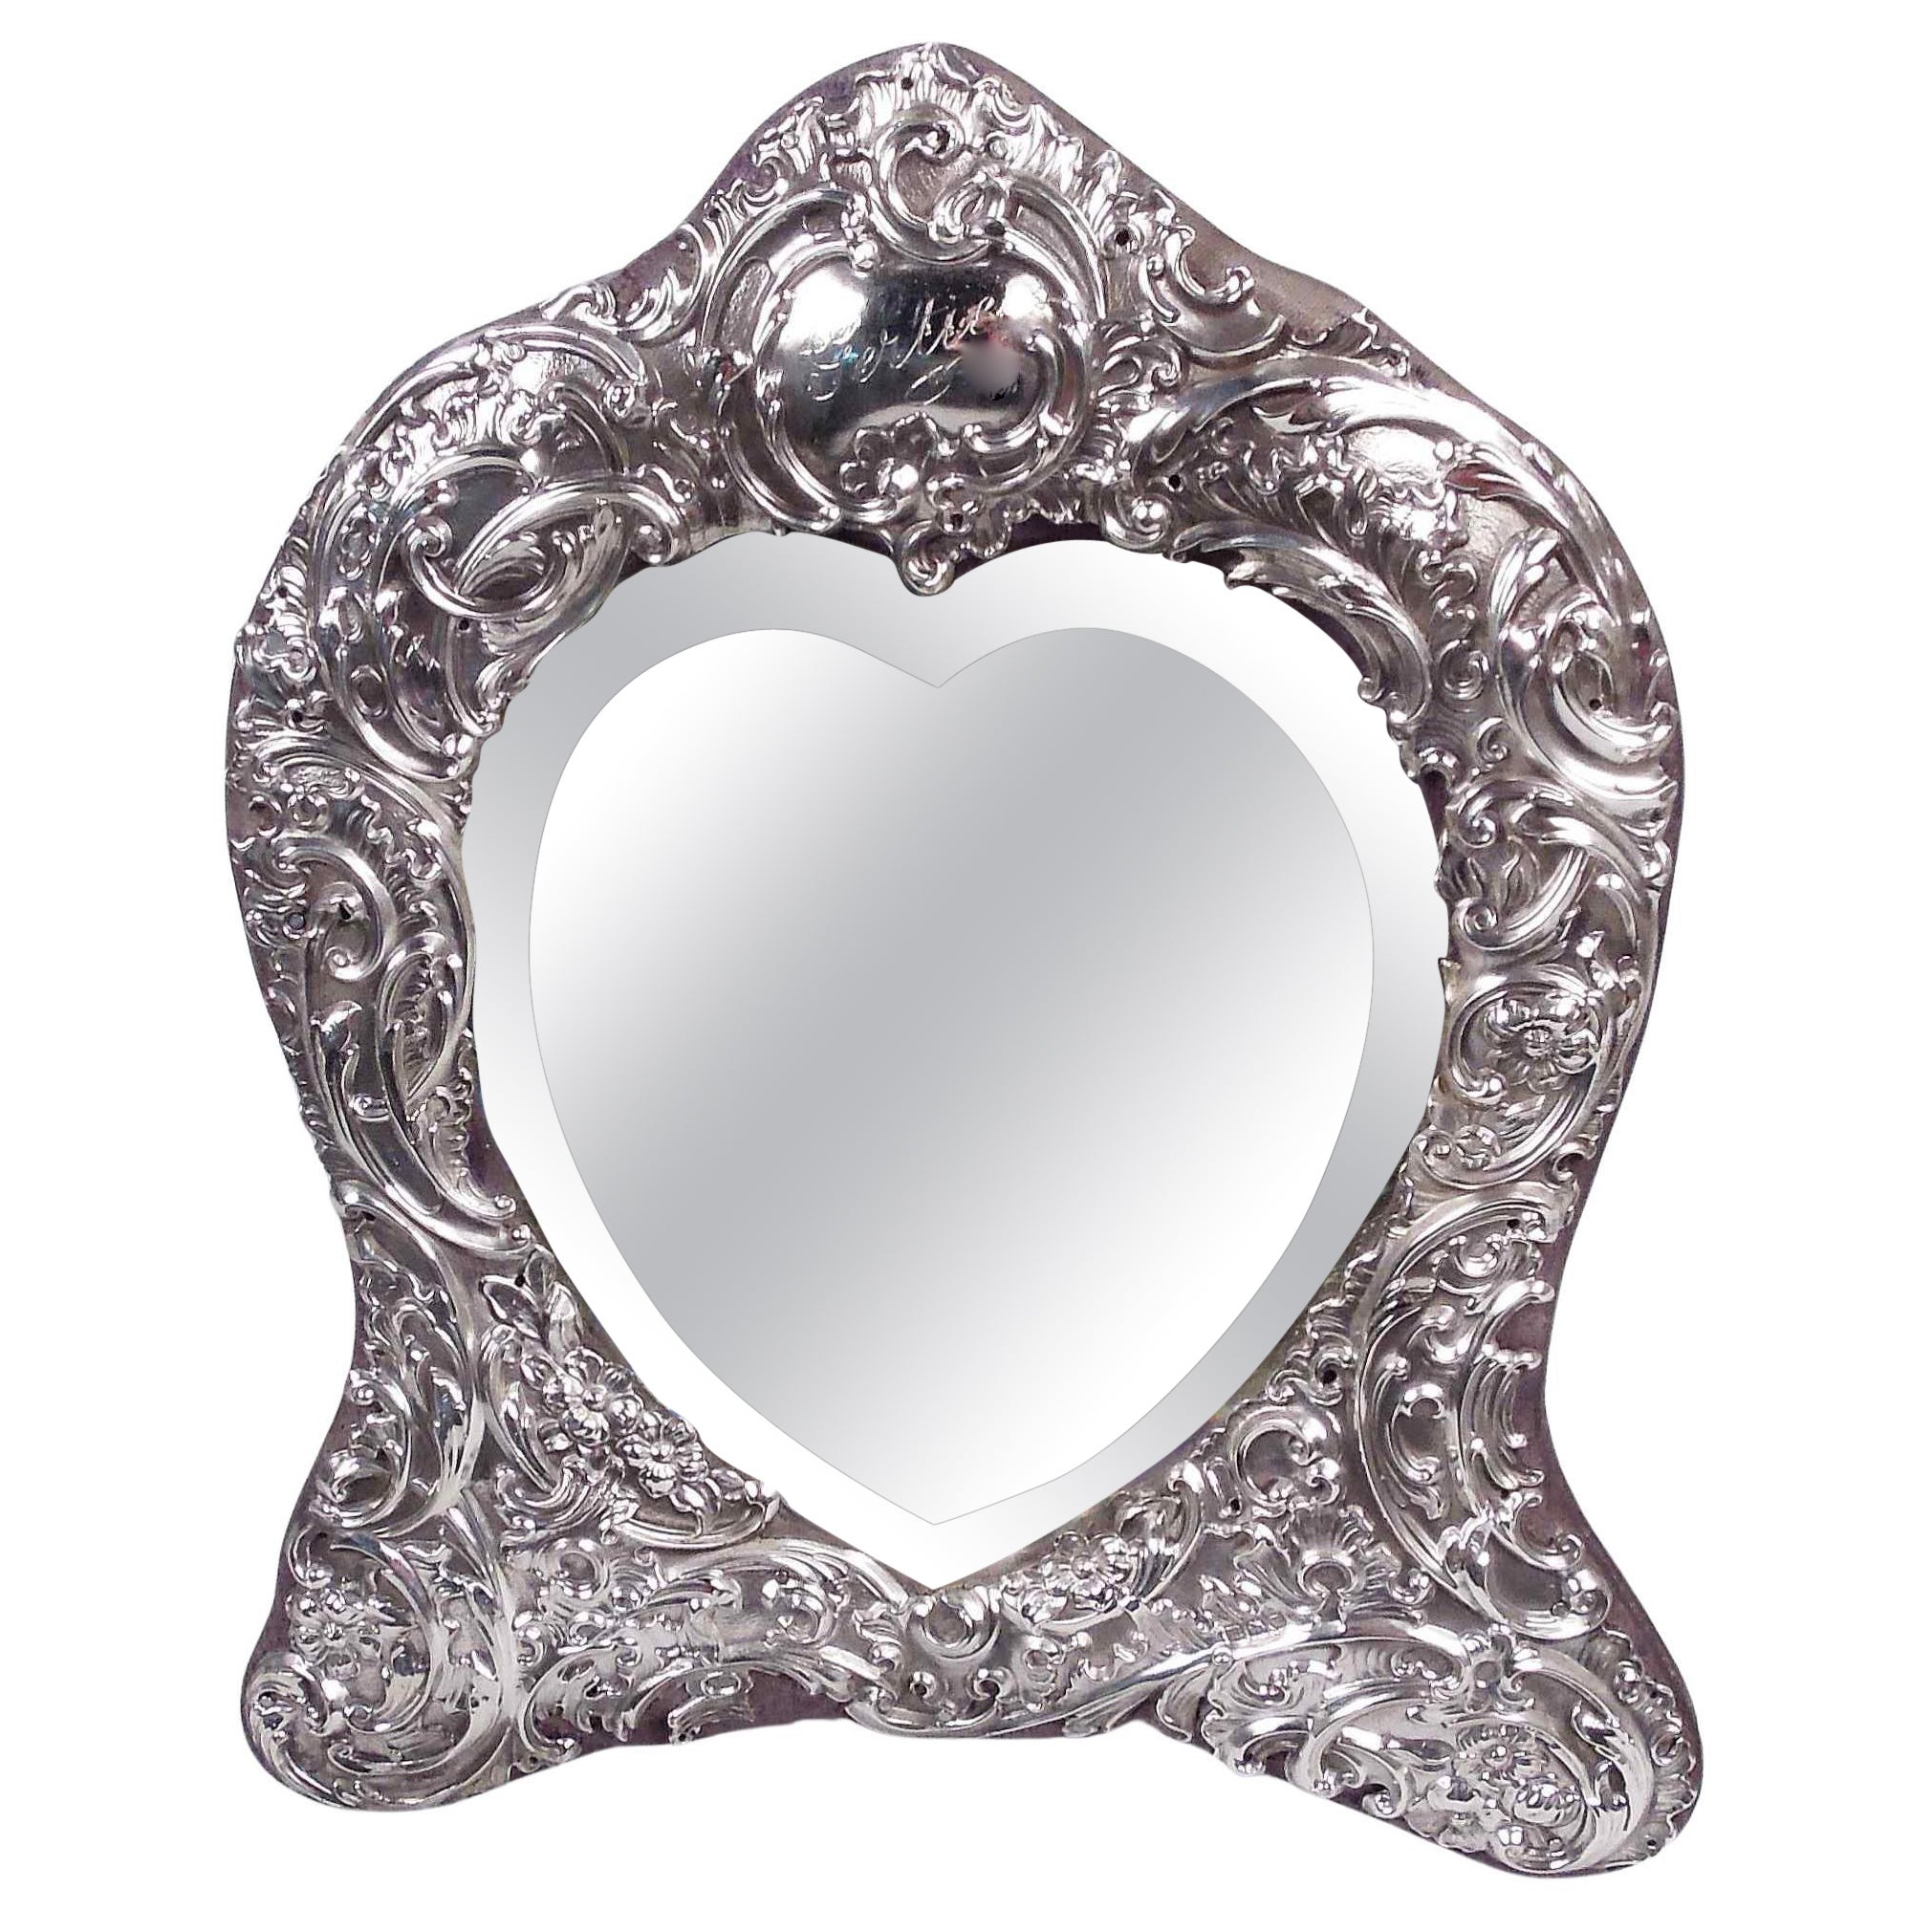 Comyns English Edwardian Rococo Sterling Silver Heart Mirror, 1907 For Sale